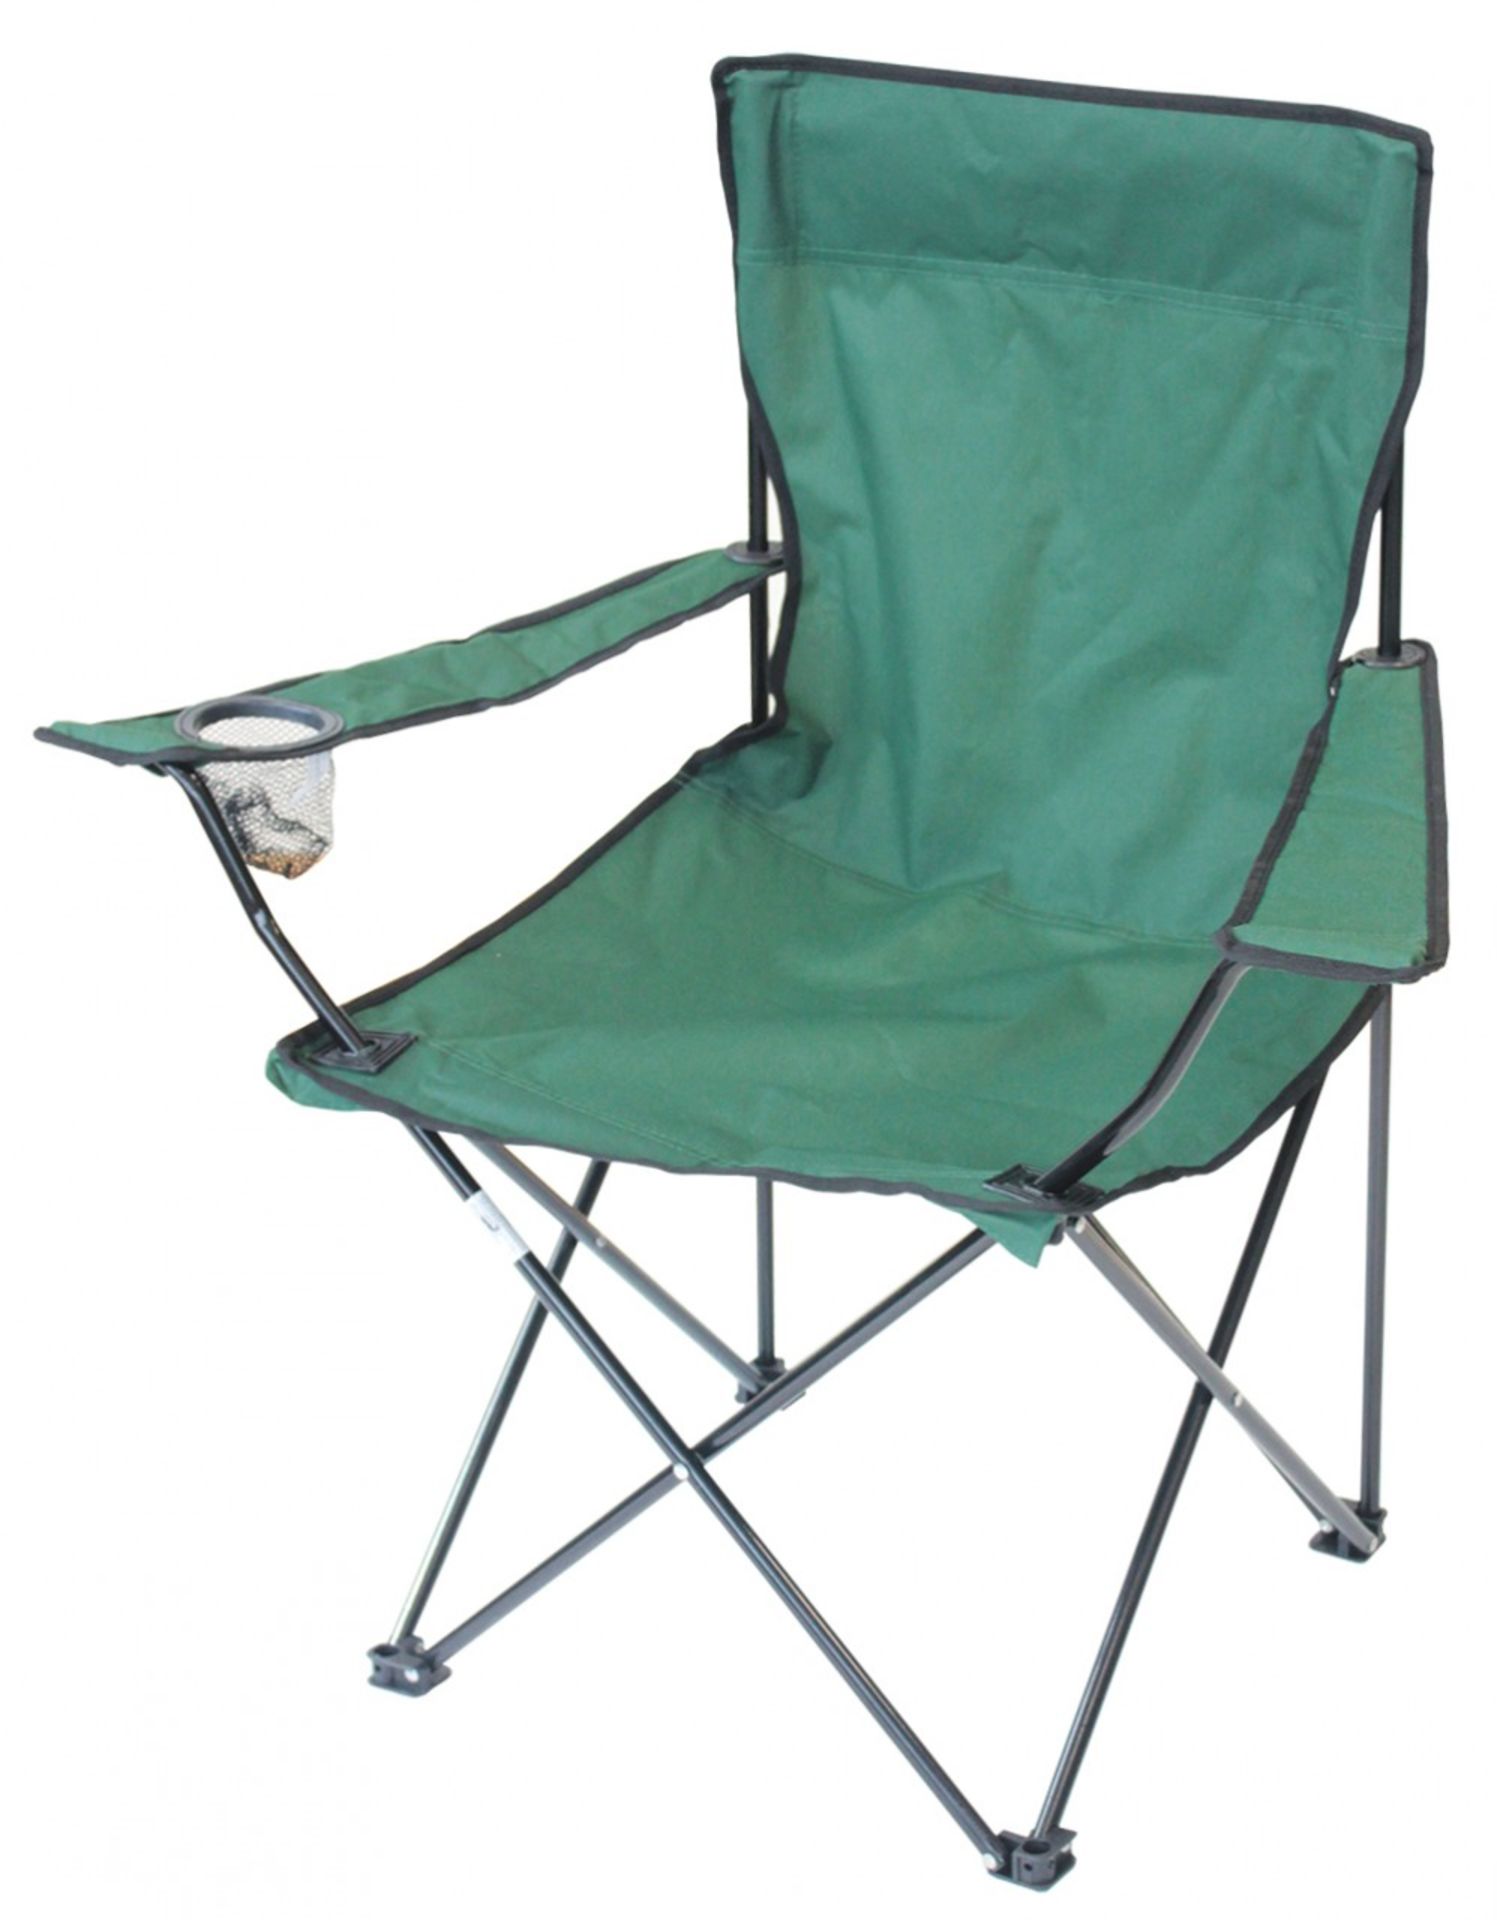 V *TRADE QTY* Brand New Folding Outdoor Chair with Cup Holder RRP £15 (similar Millets) X 5 YOUR BID